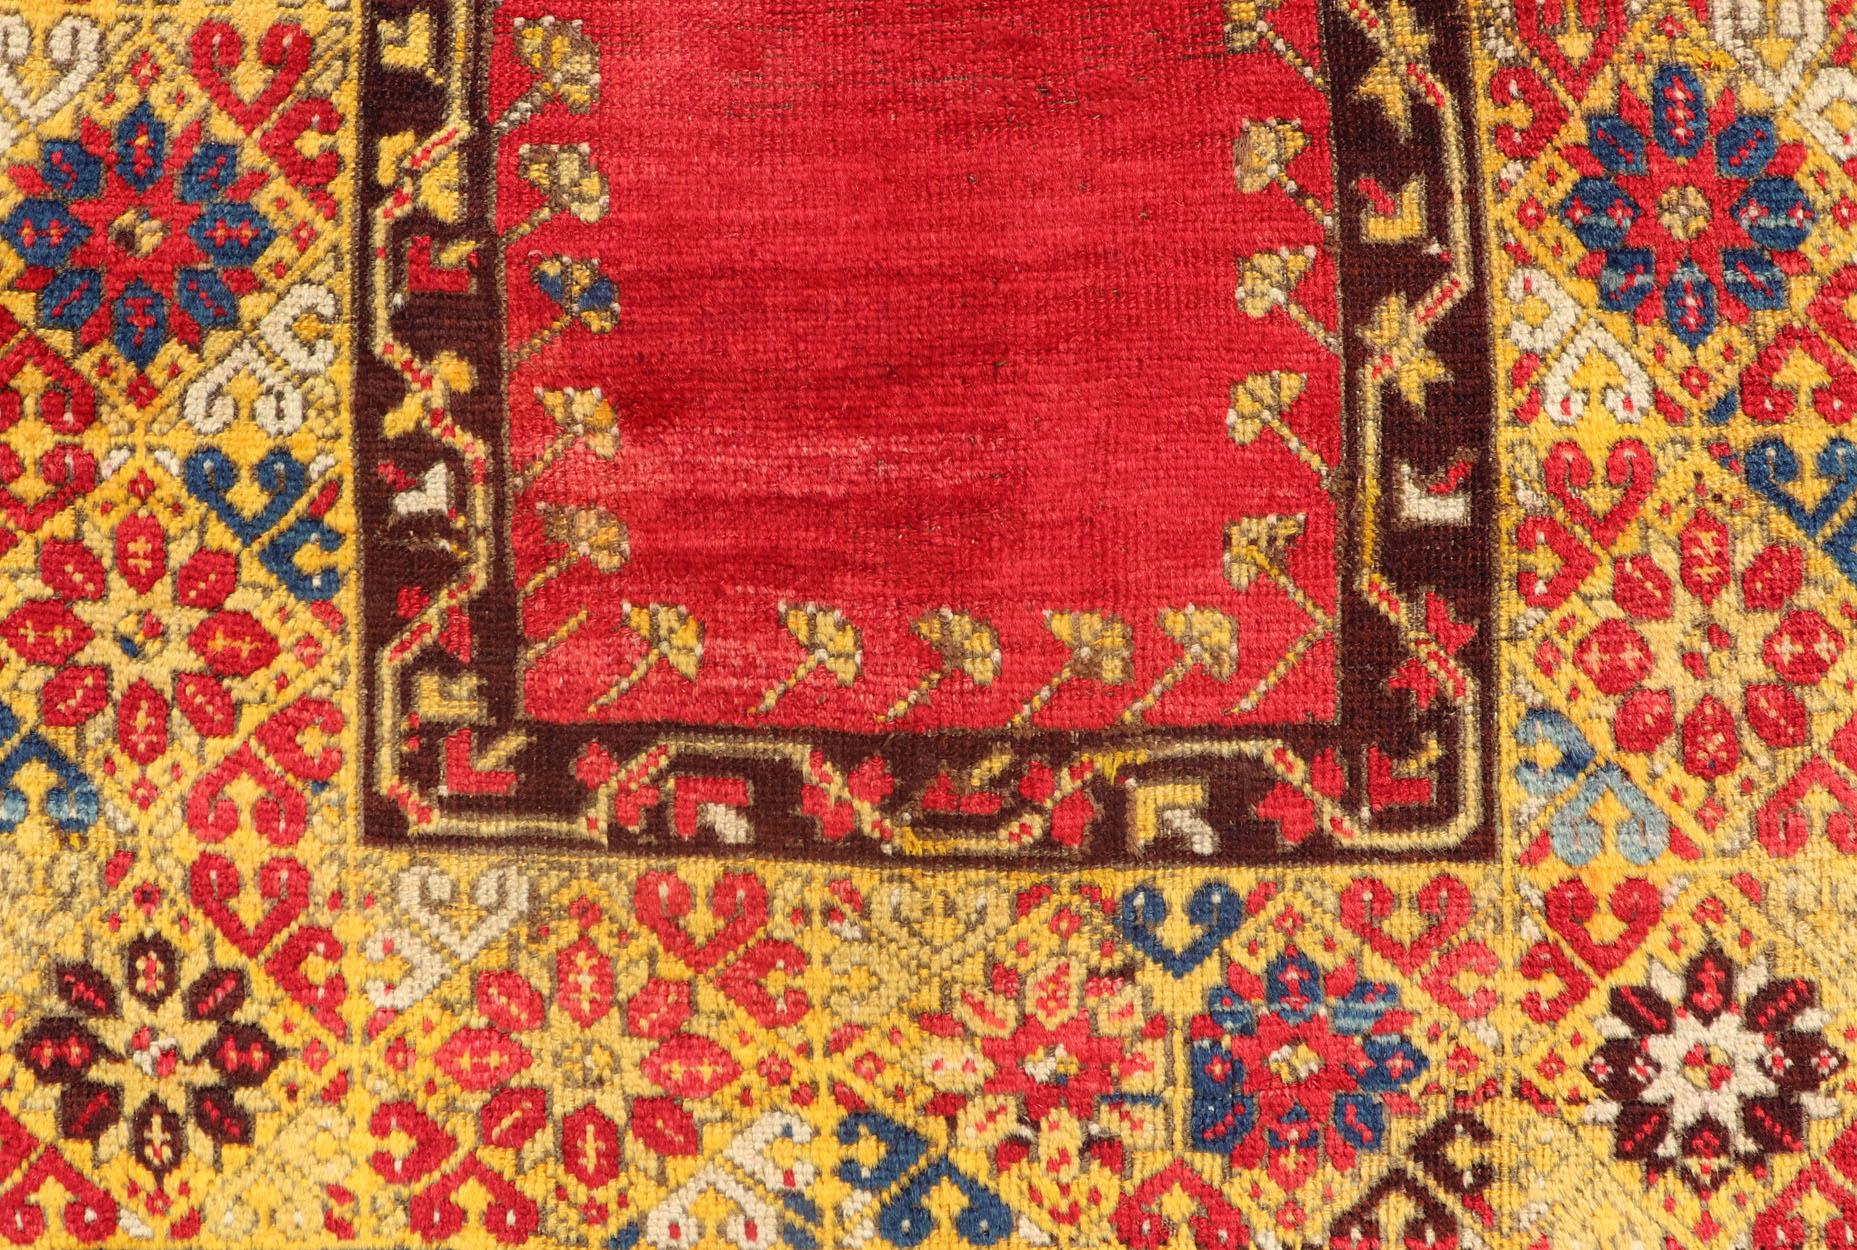 Antique Turkish Prayer Rug in Vibrant Saffron Yellow, Gold, Red and Blue For Sale 3